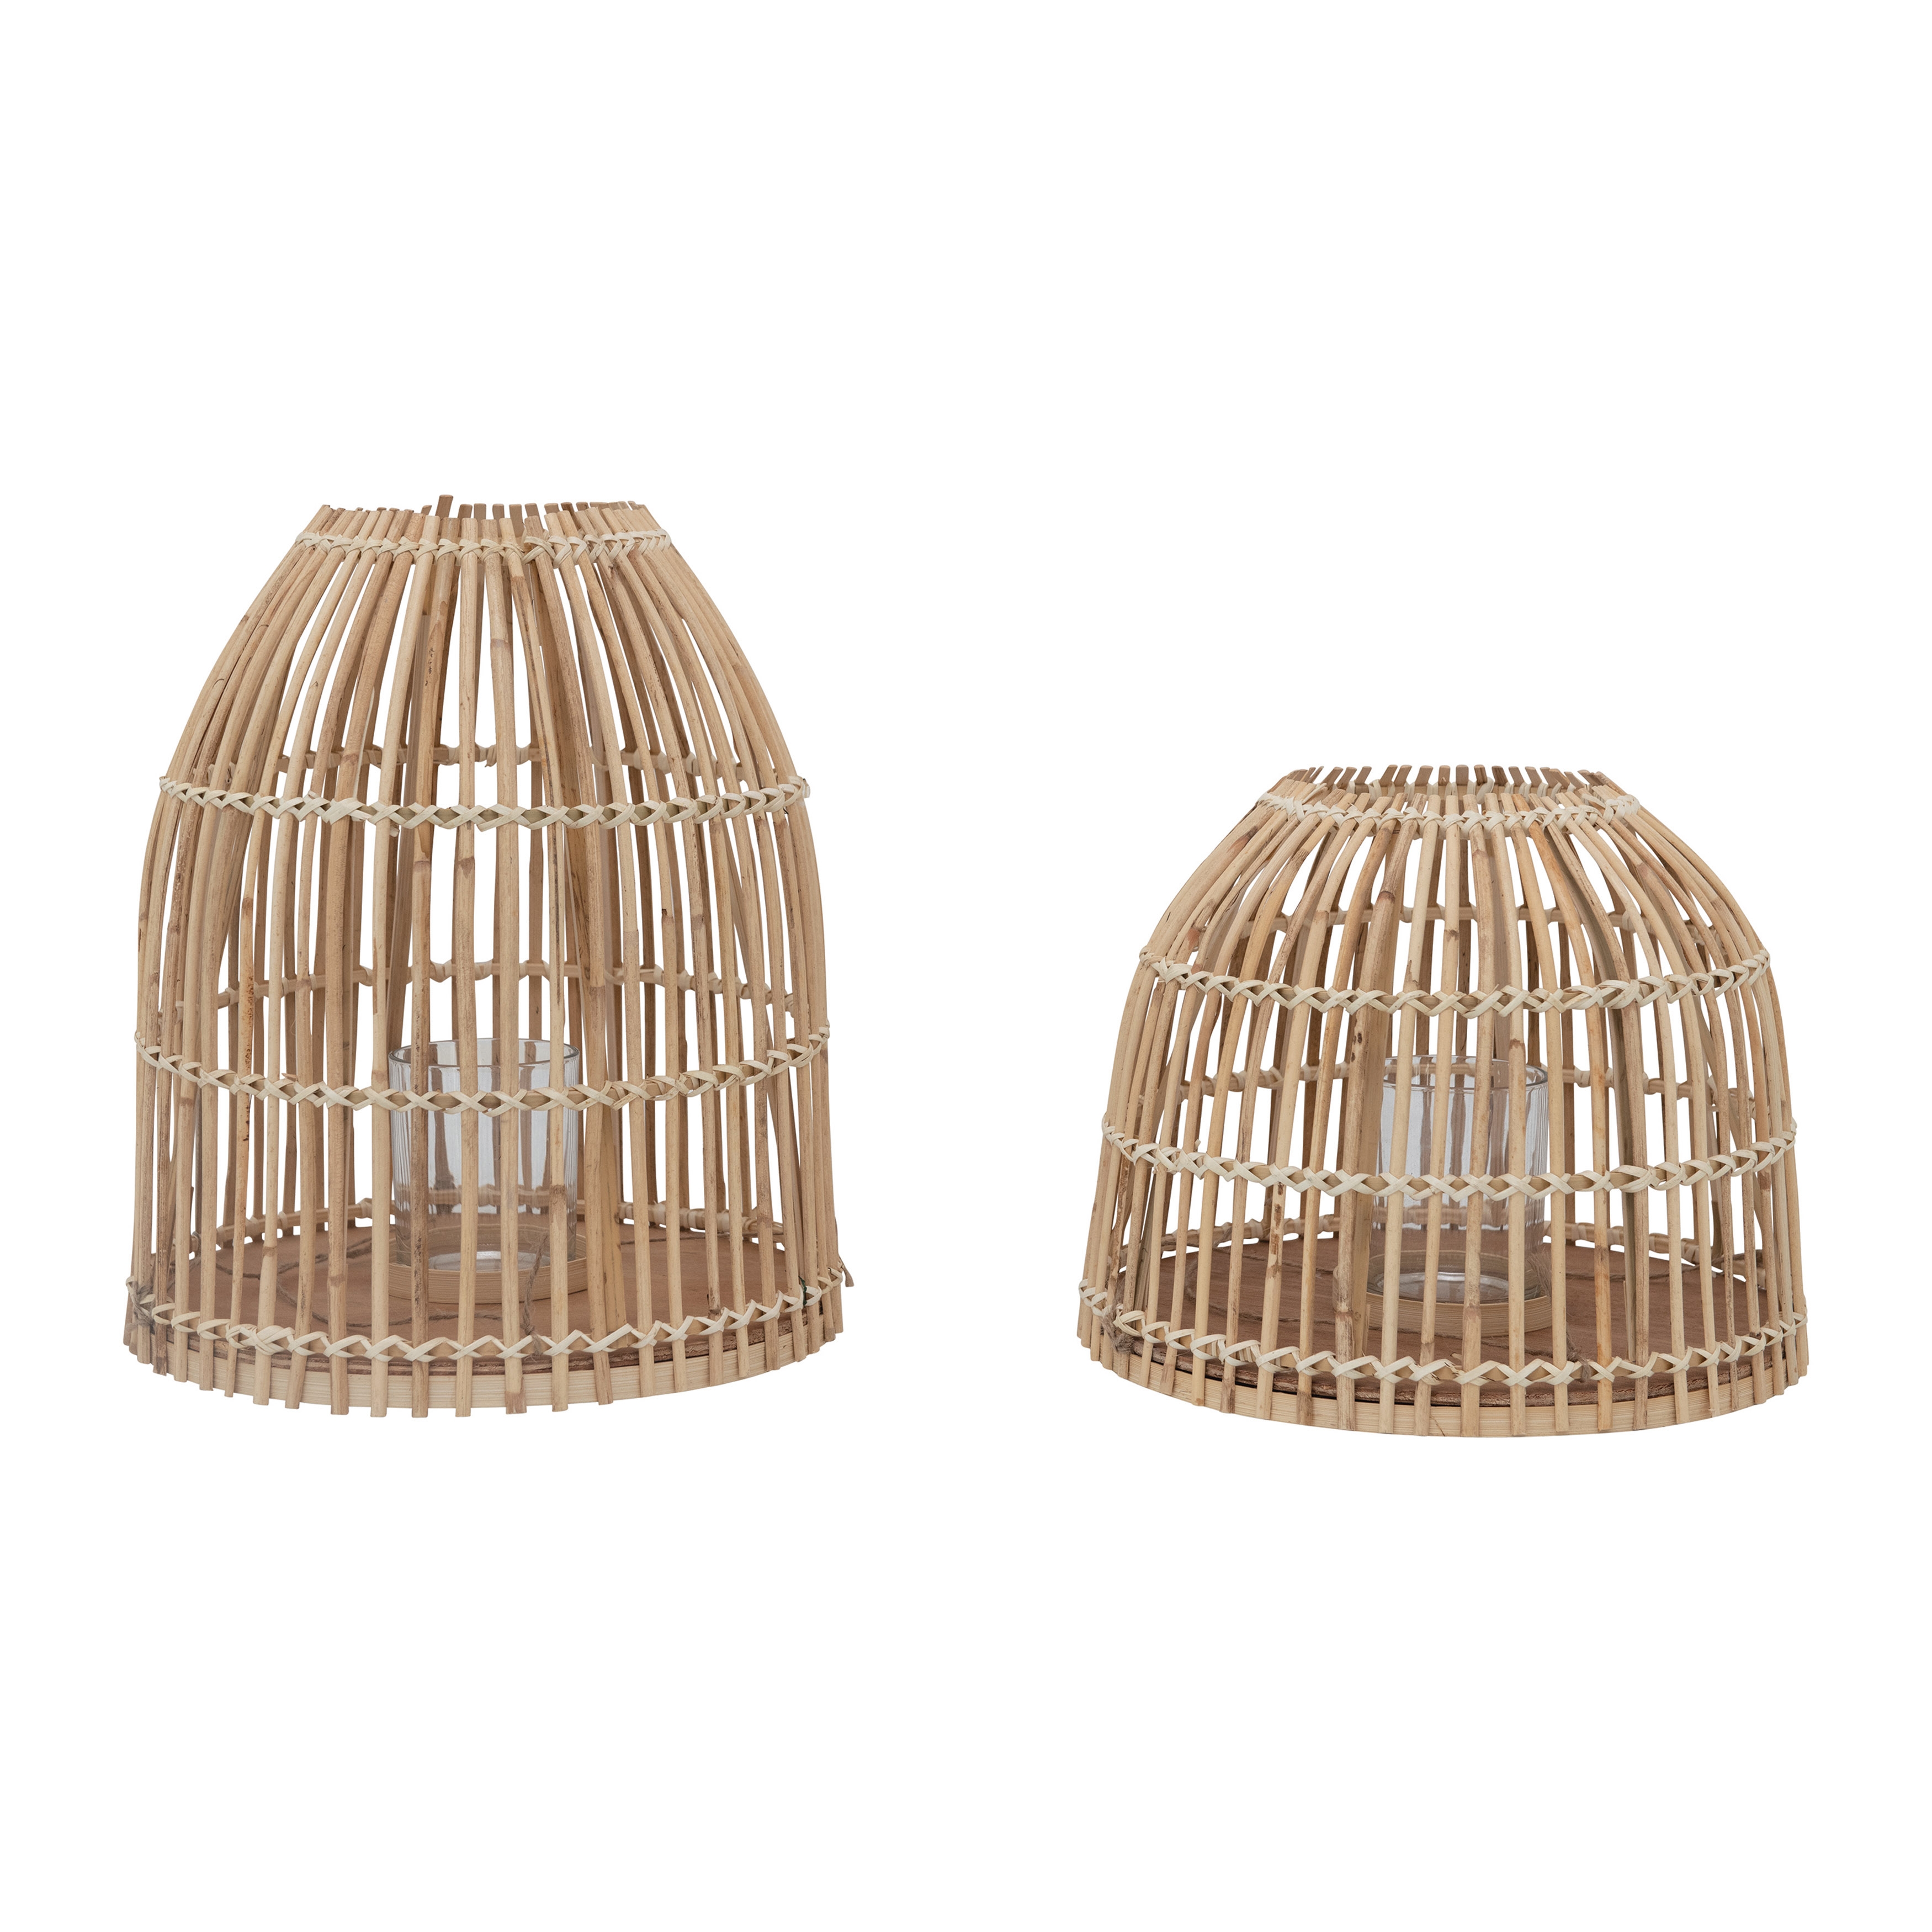 Bamboo Lanterns with Glass Inserts, Set of 2 - Image 0